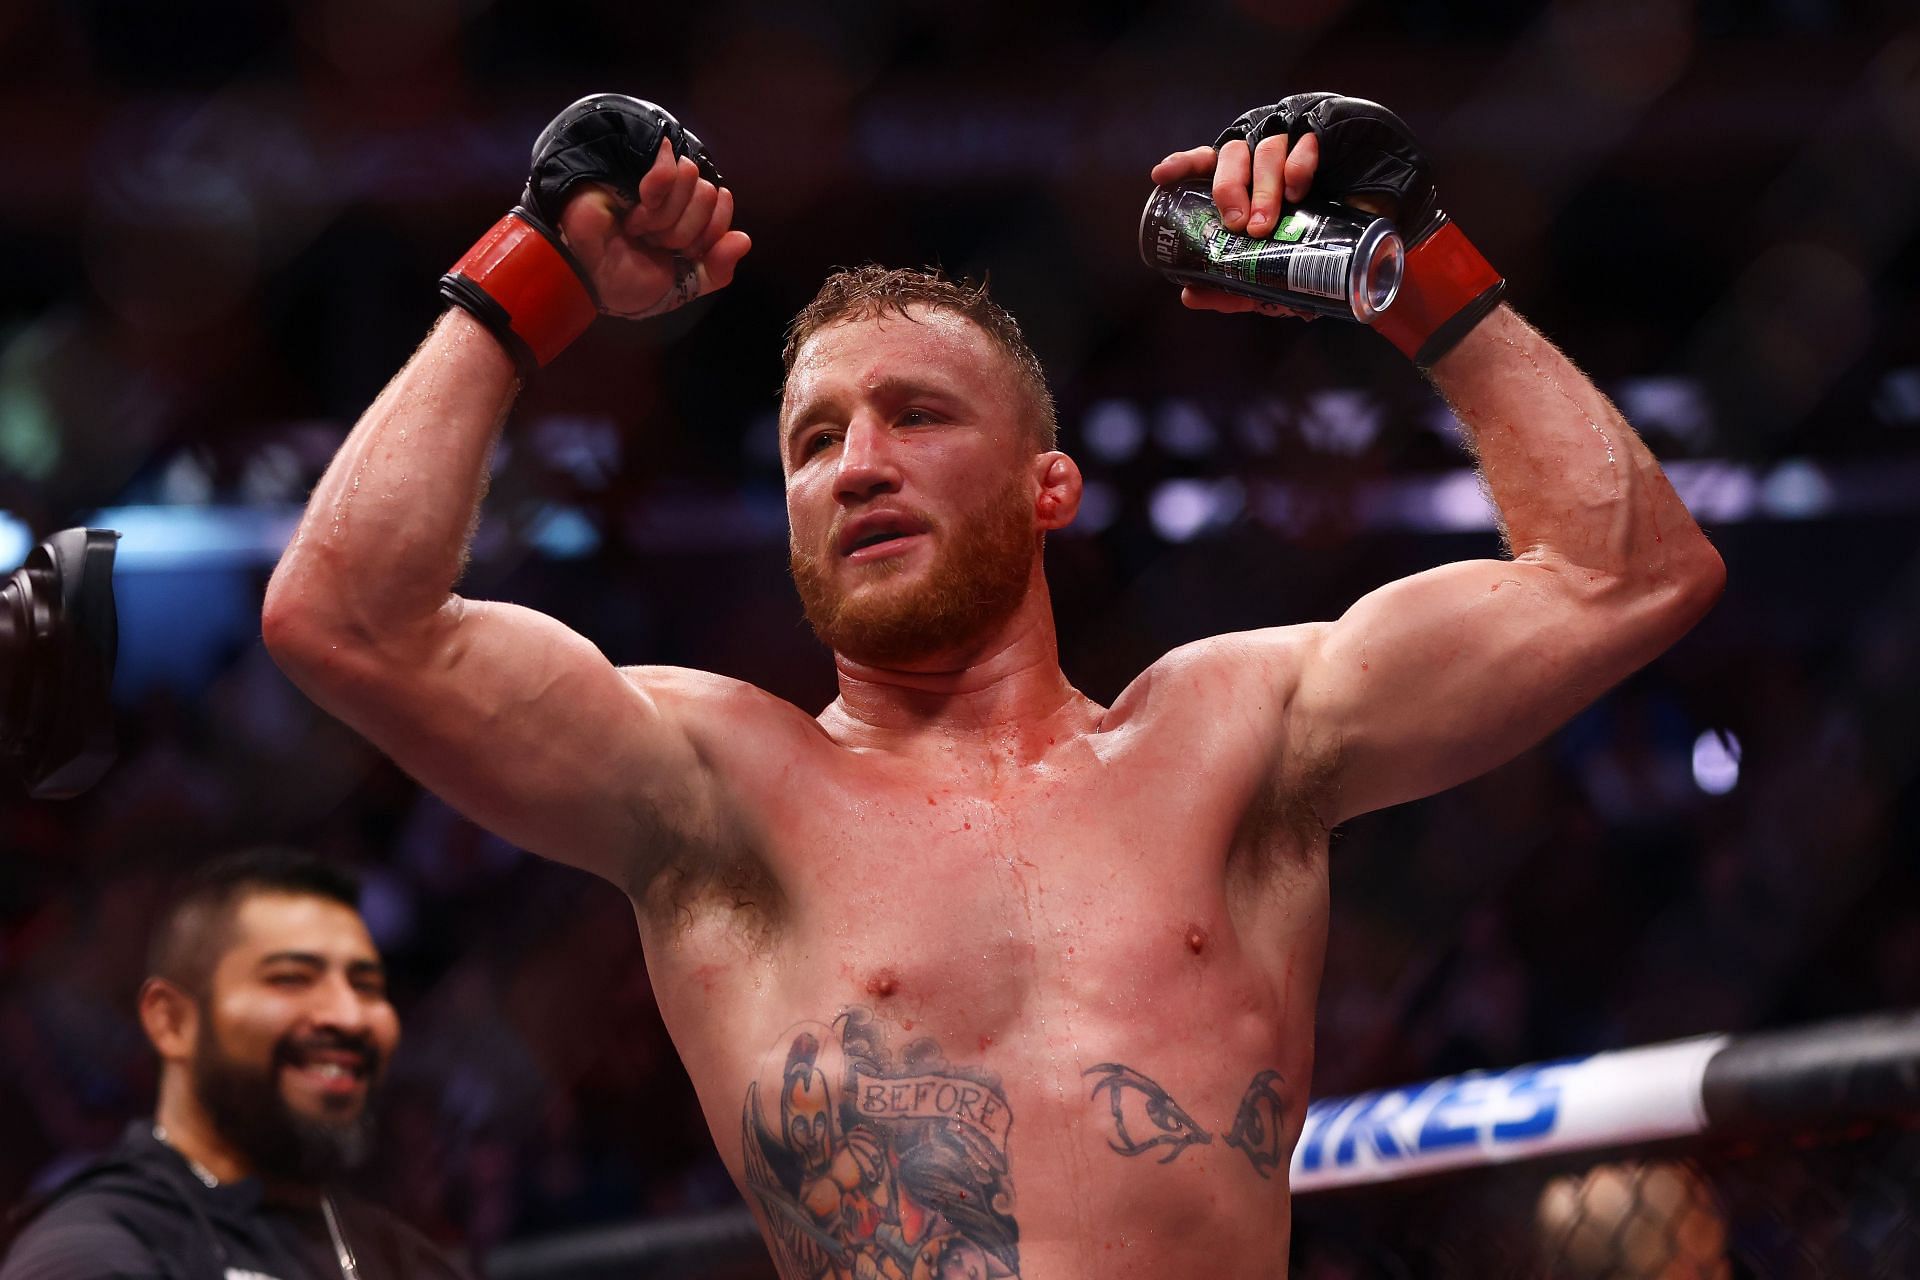 Gaethje is currently ranked No.1 in the lightweight division